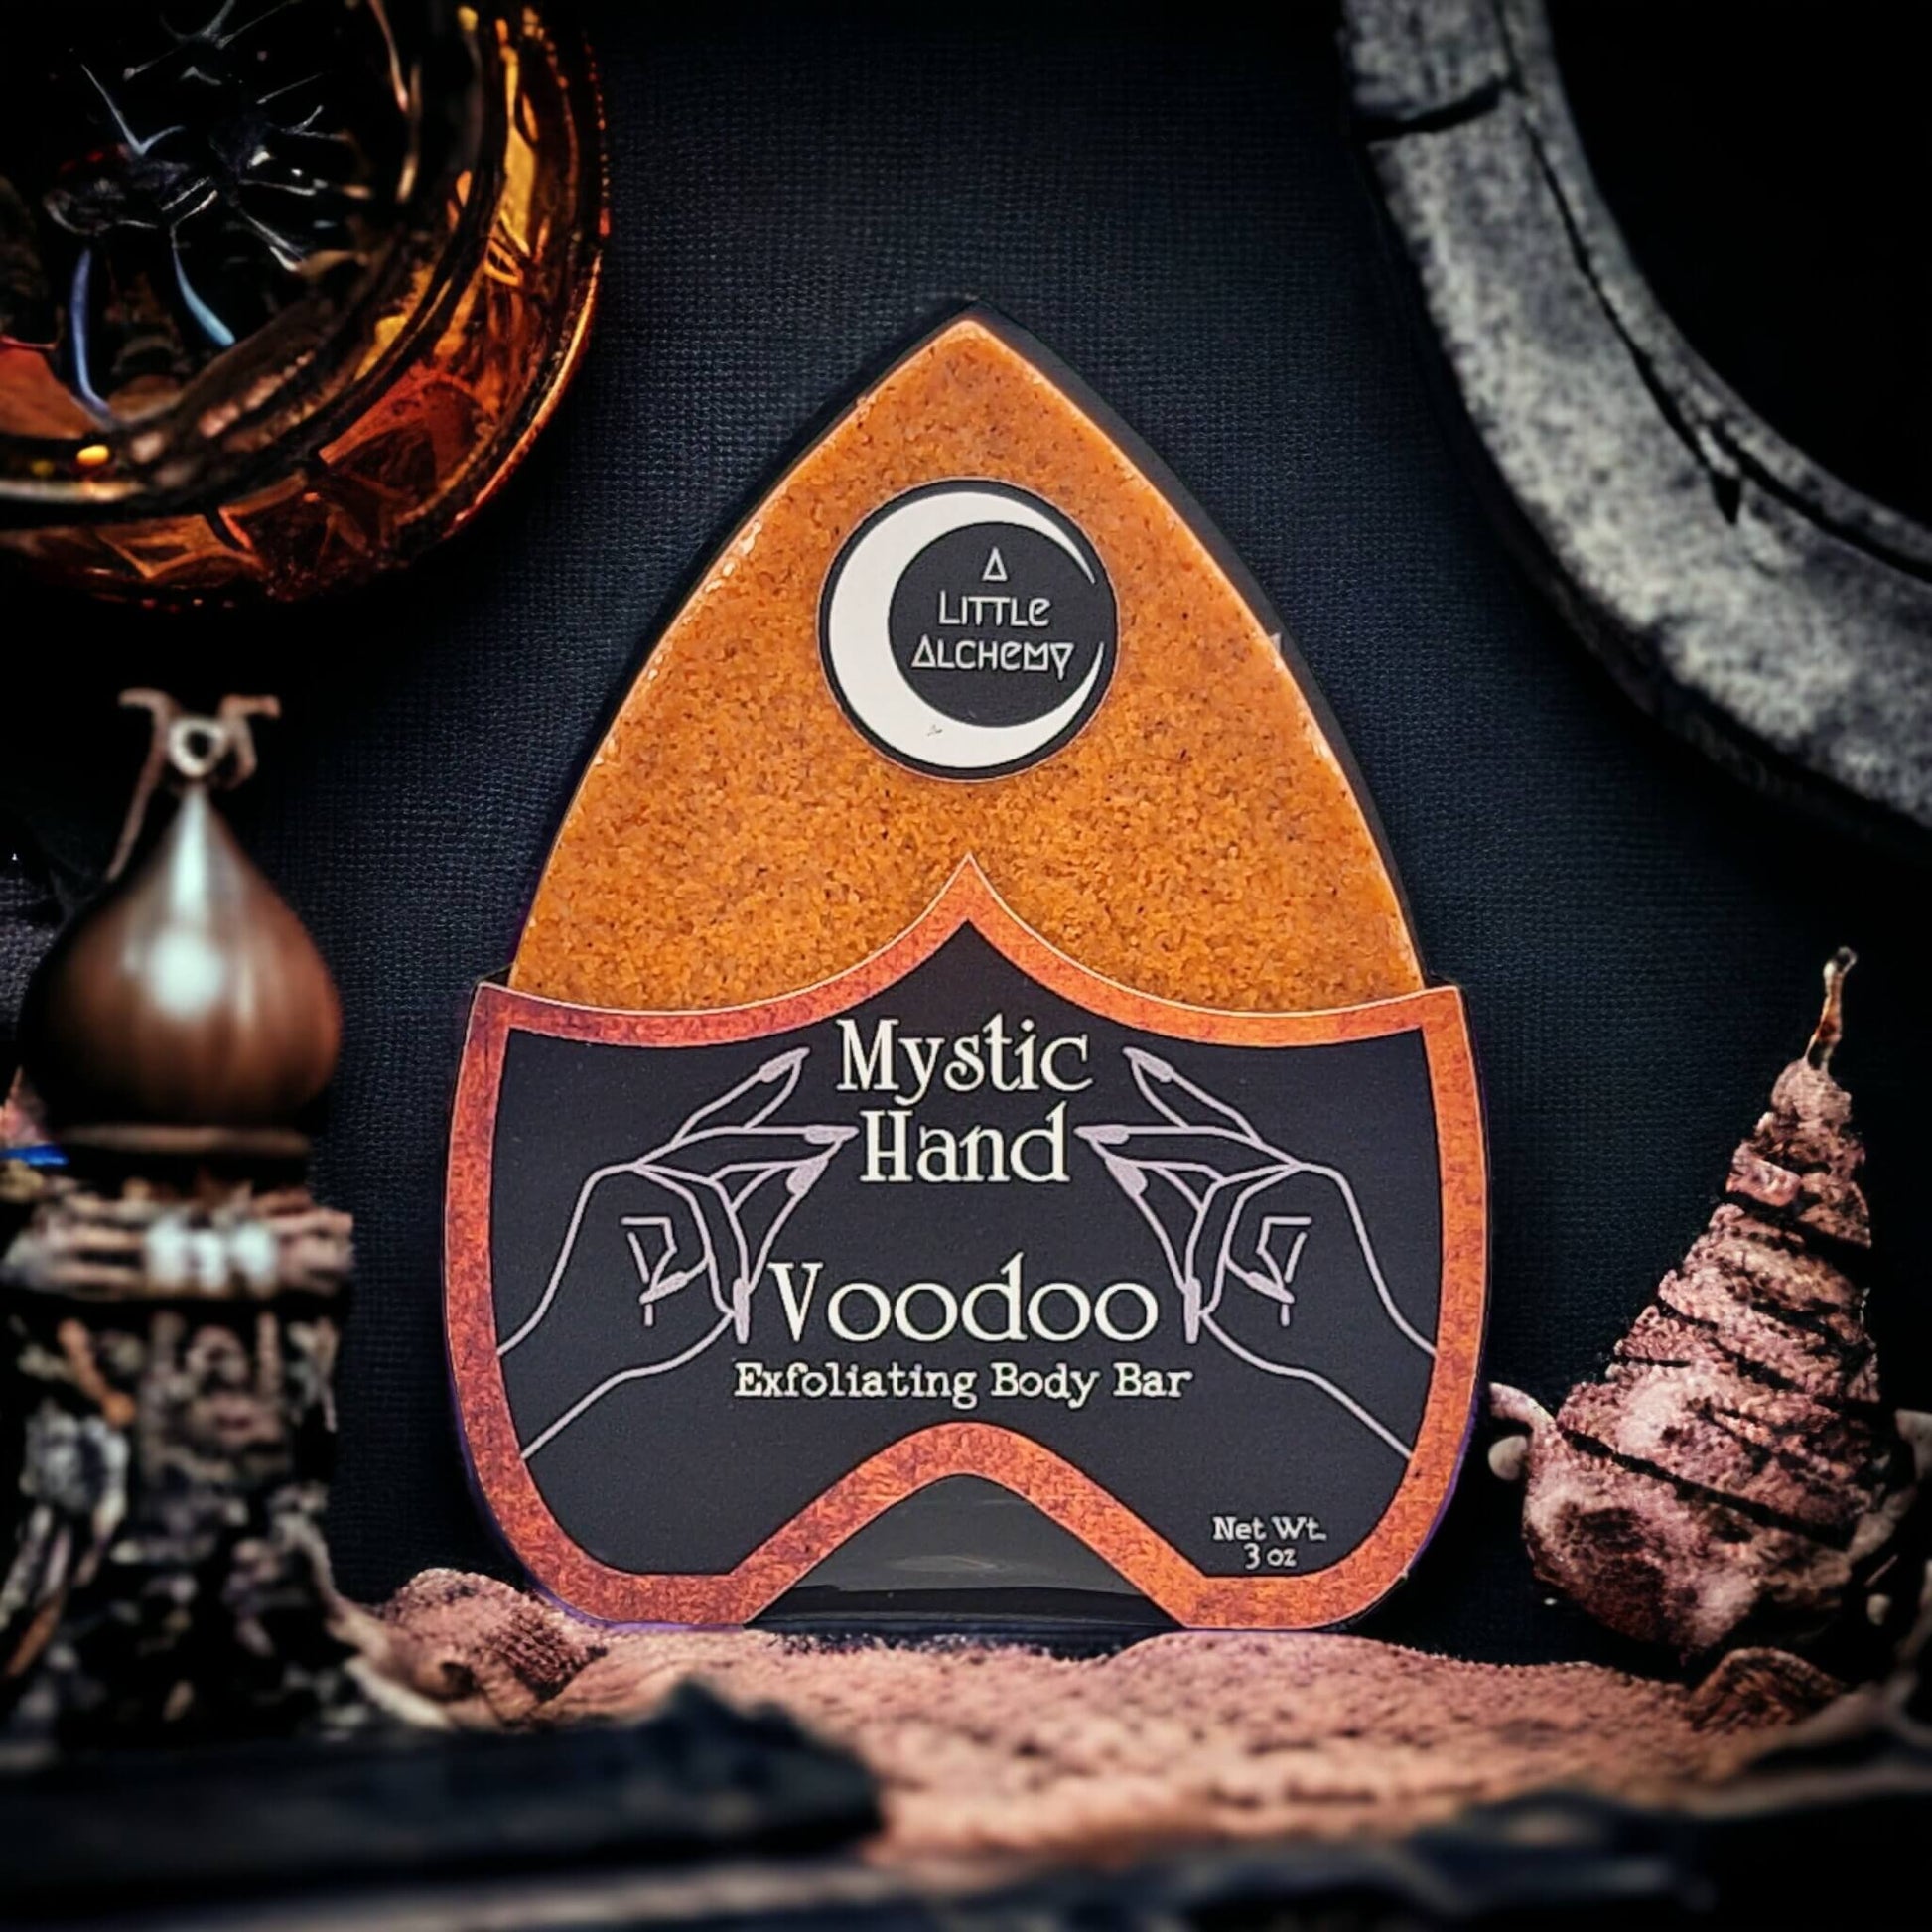 Picture of our mystic hand exfoliating body bar in the scent Voodoo.